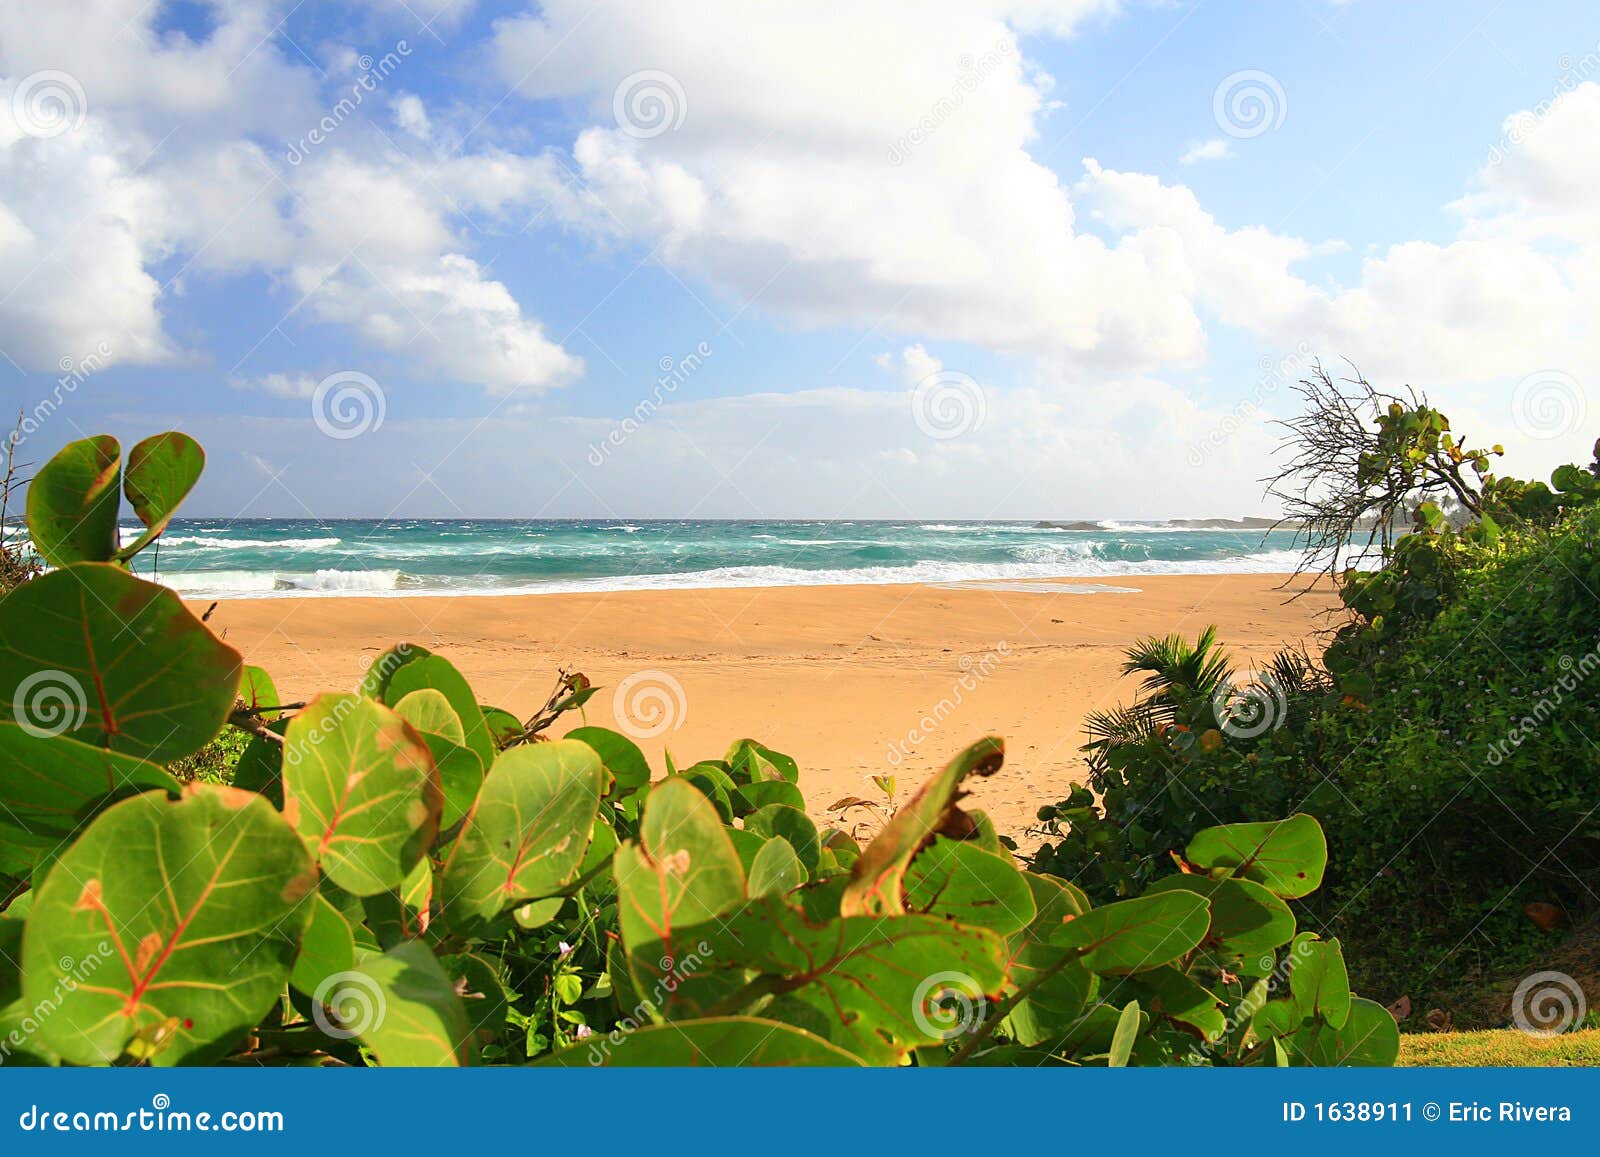 beatiful secluded beach in isabela, puerto rico